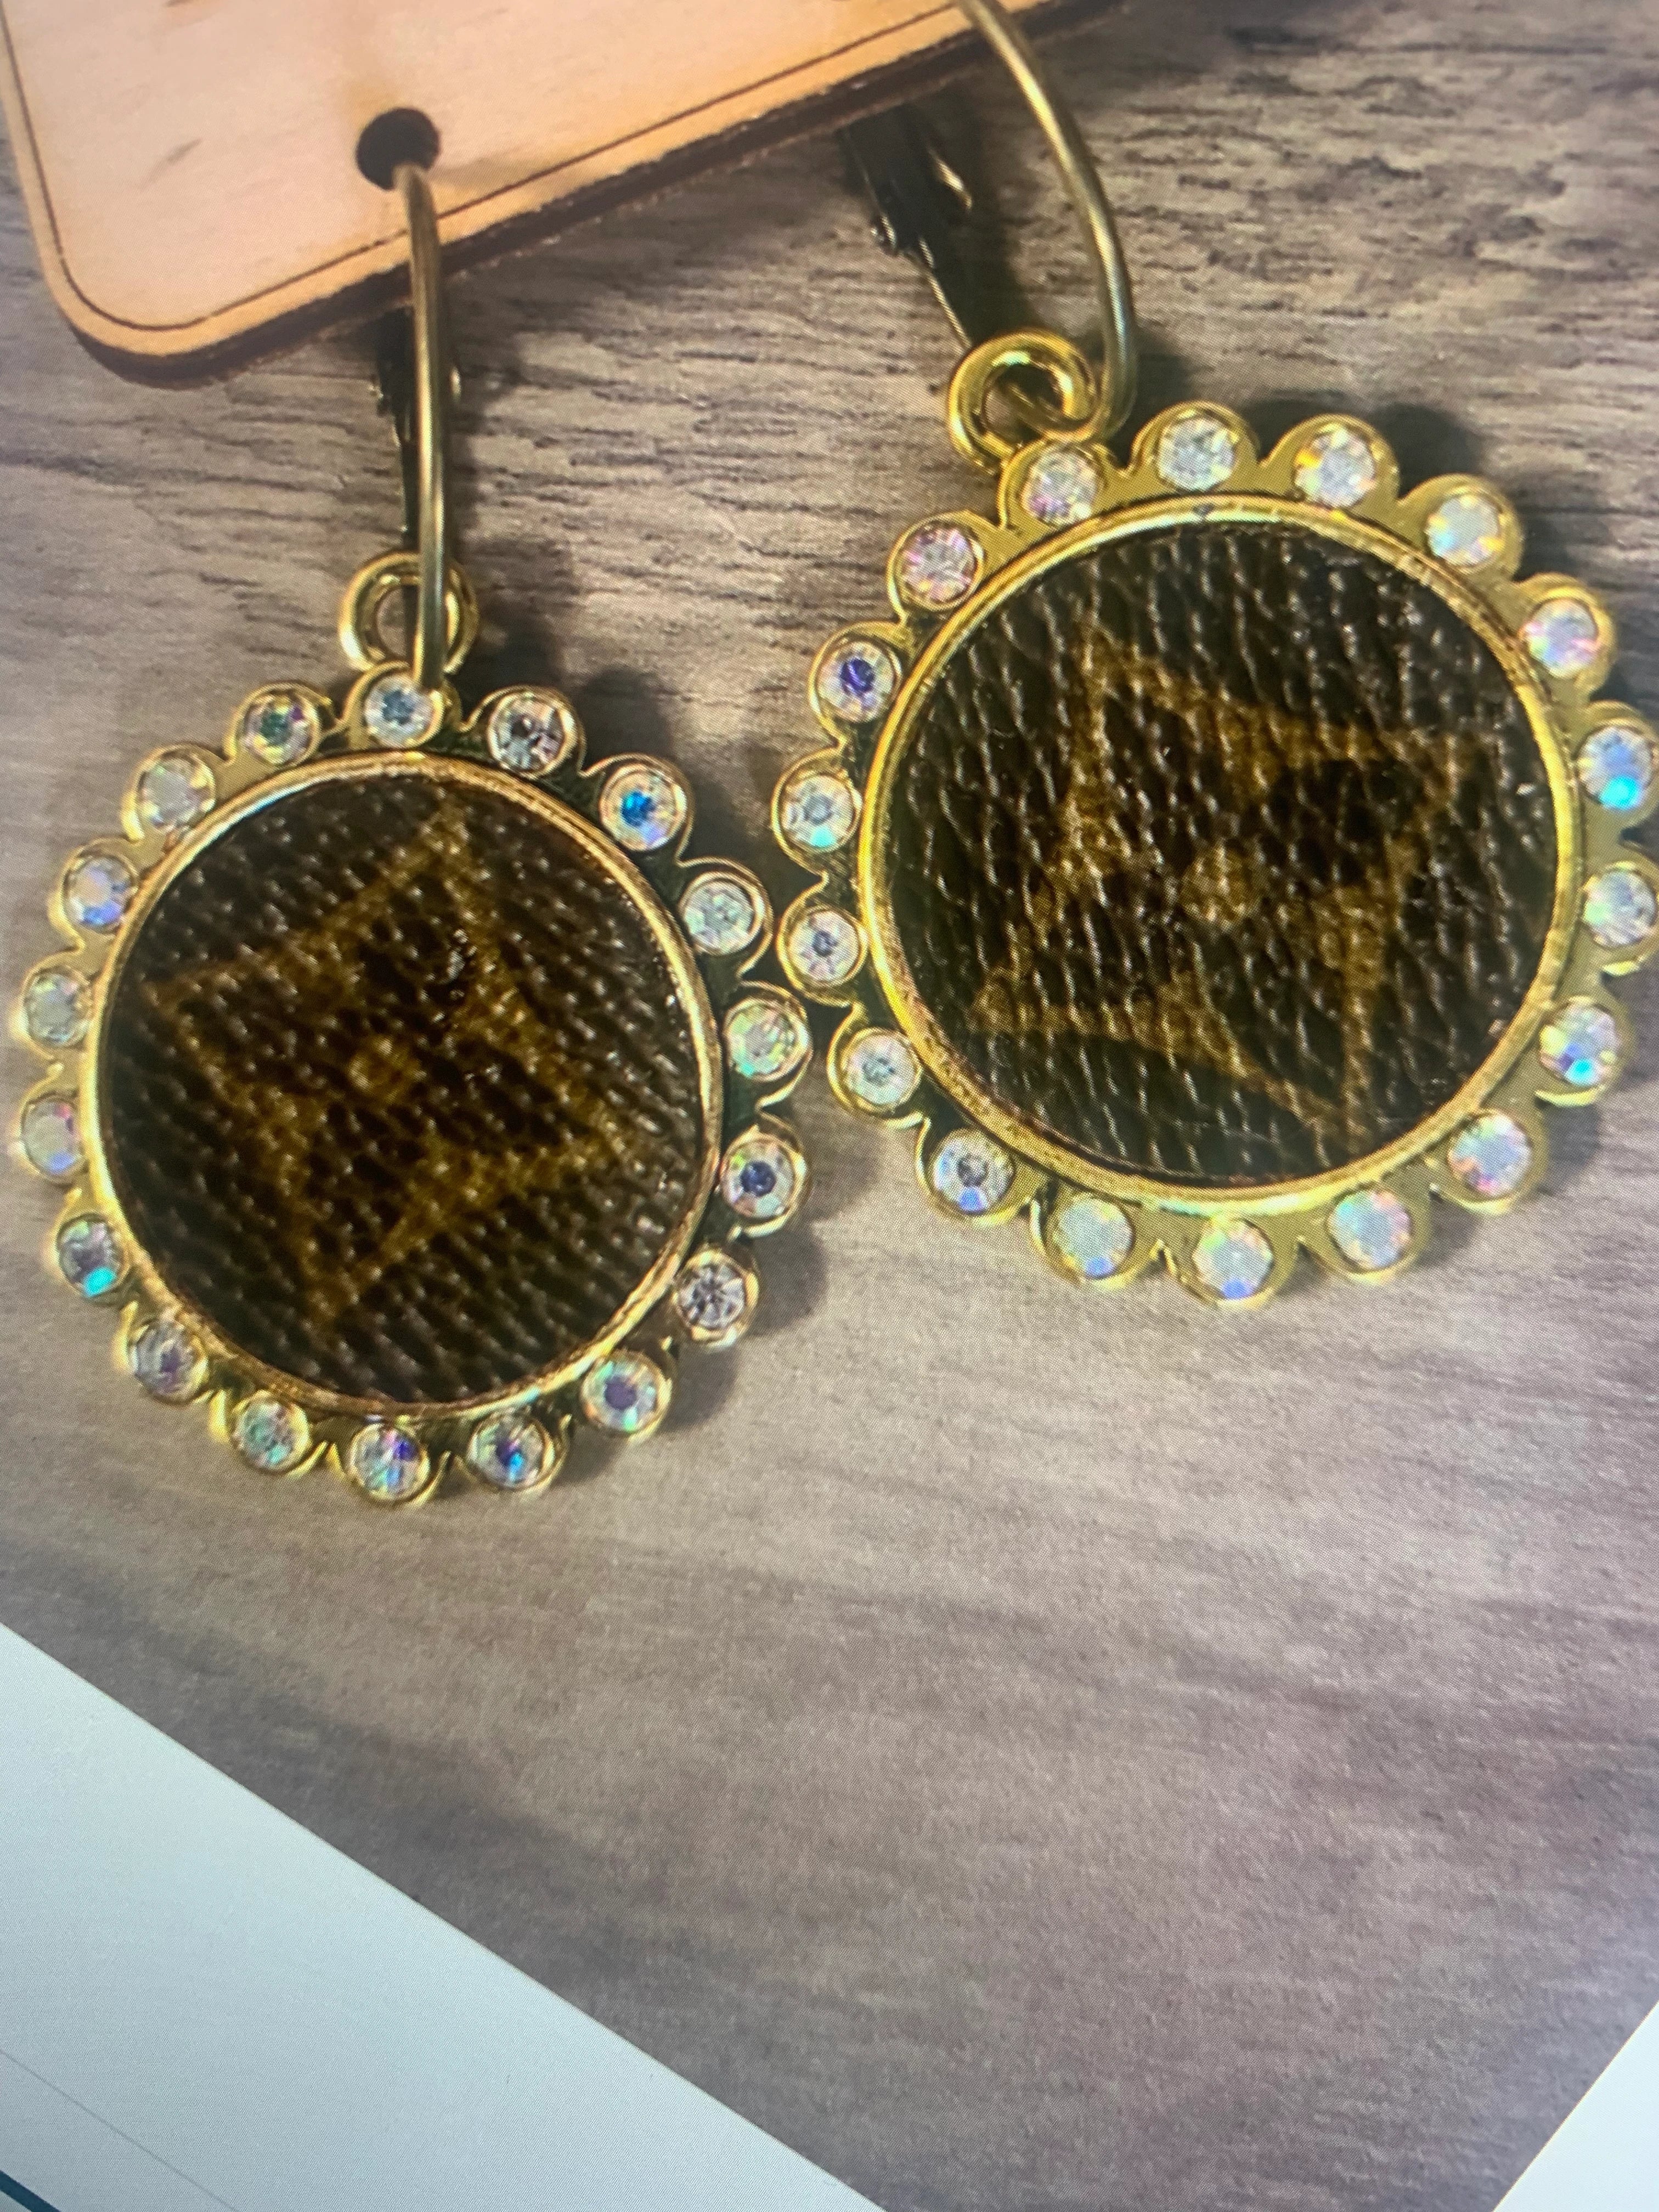 Rustic Golden Upcycled Earrings